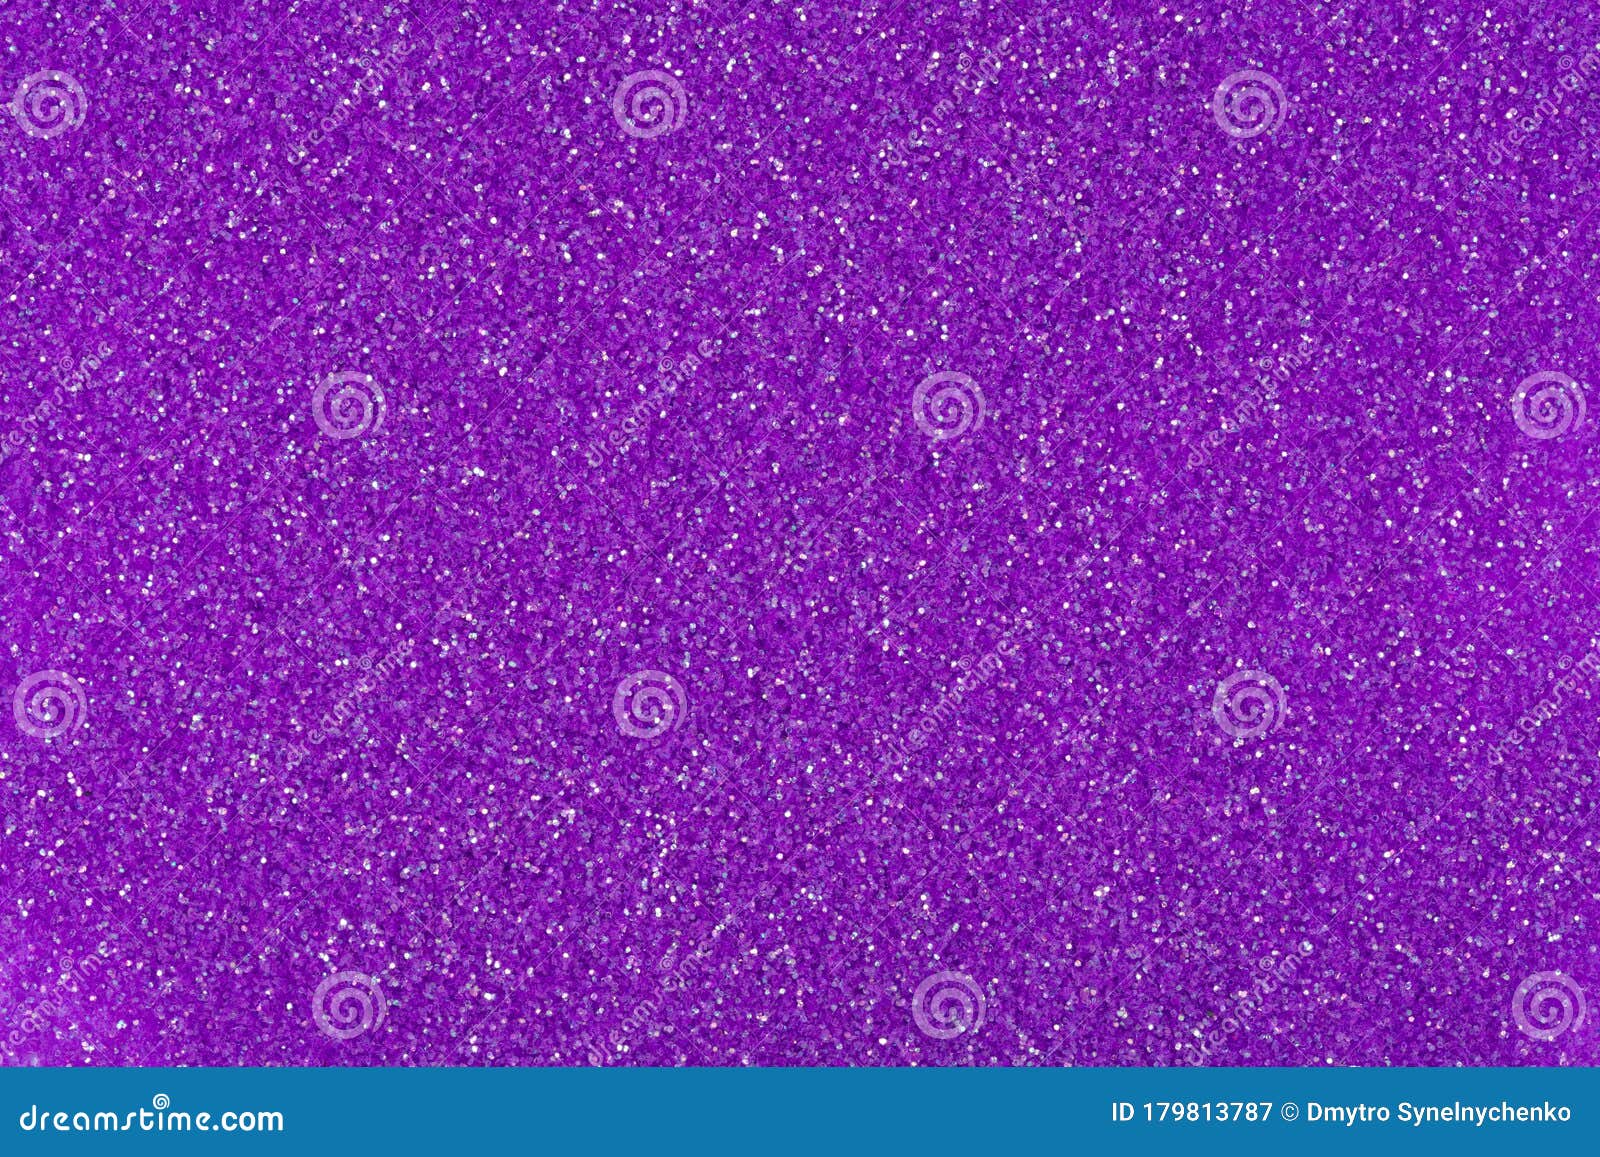 Violet Glitter Background, Your New Texture for Project Design Work. Stock  Image - Image of colorful, abstract: 179813787